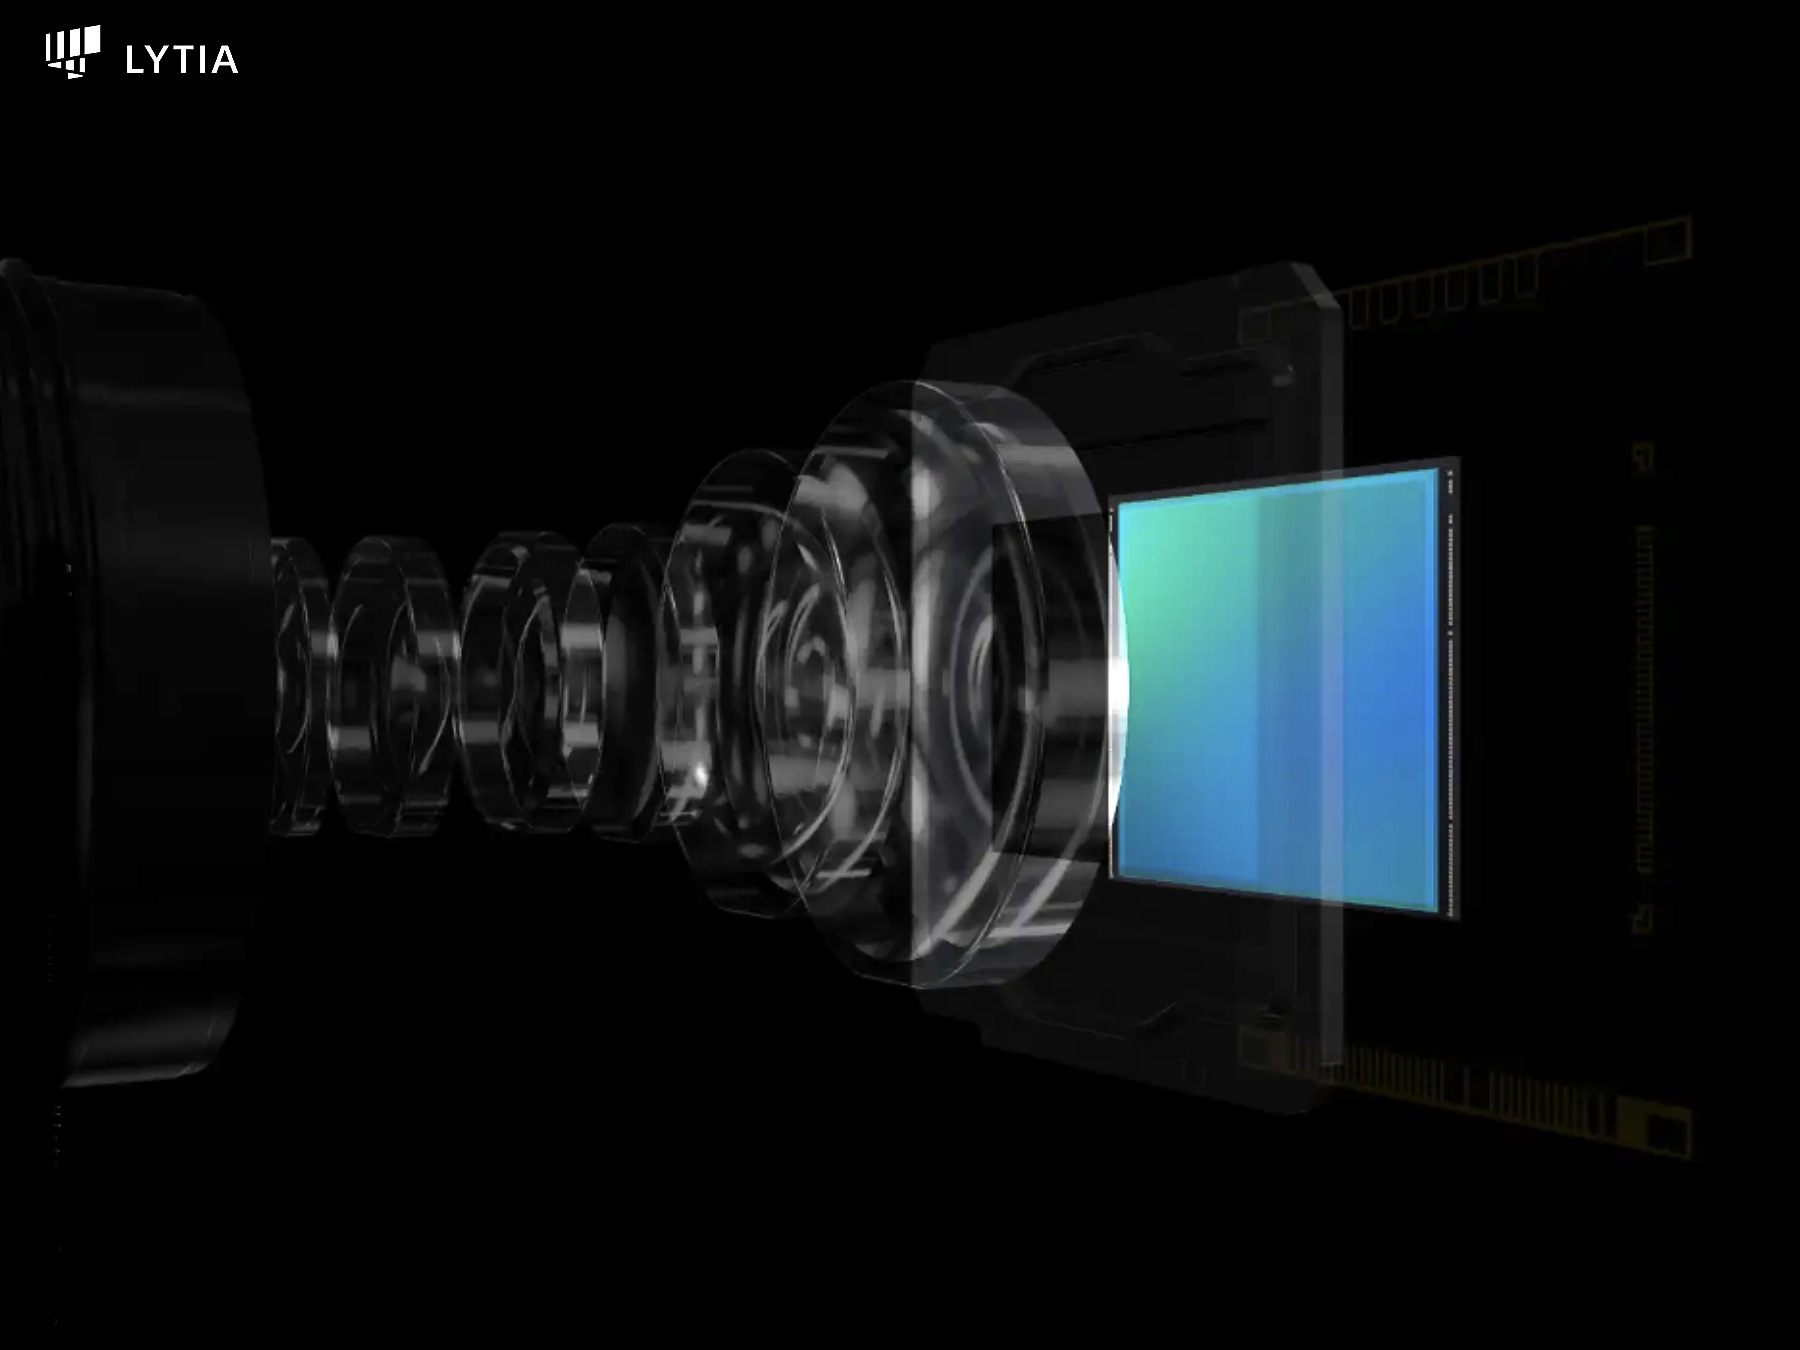 Sony LYTIA: a new name for high-quality photography and videography sensors